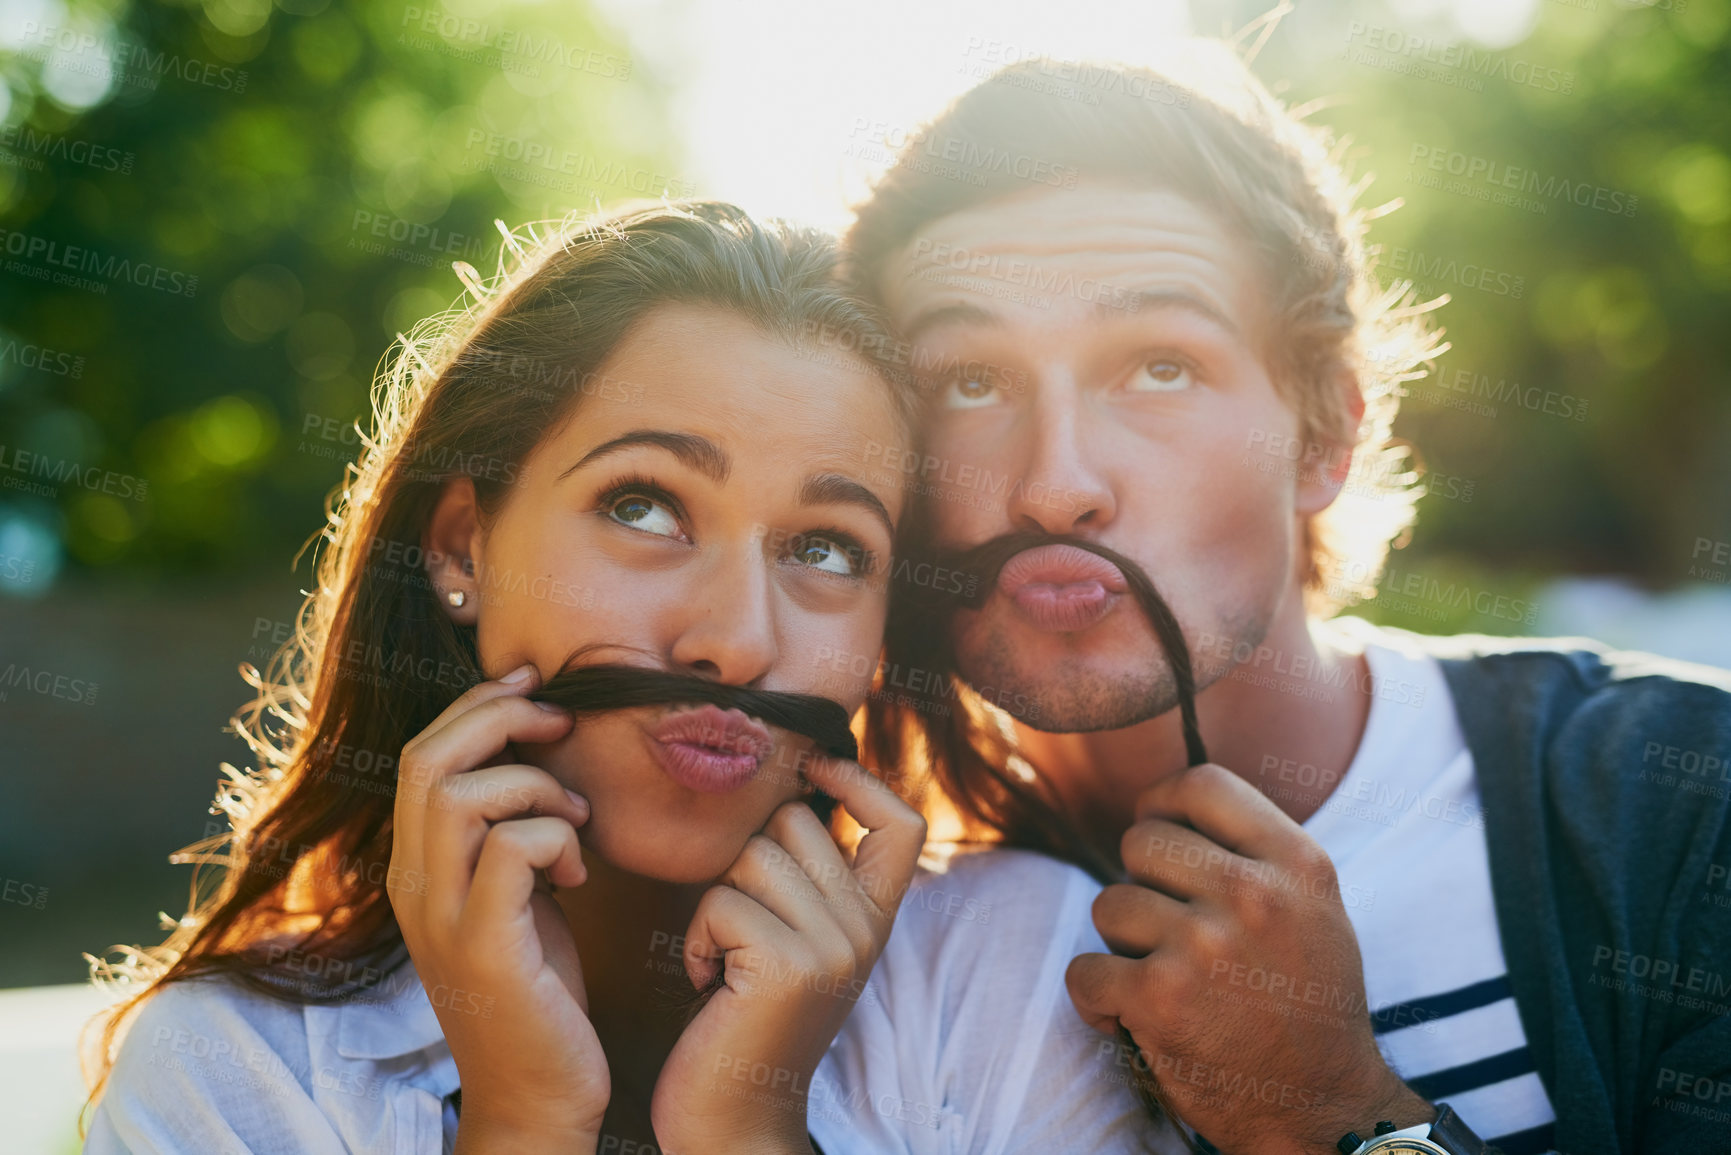 Buy stock photo Shot of a young couple enjoying a silly moment together while bonding outdoors